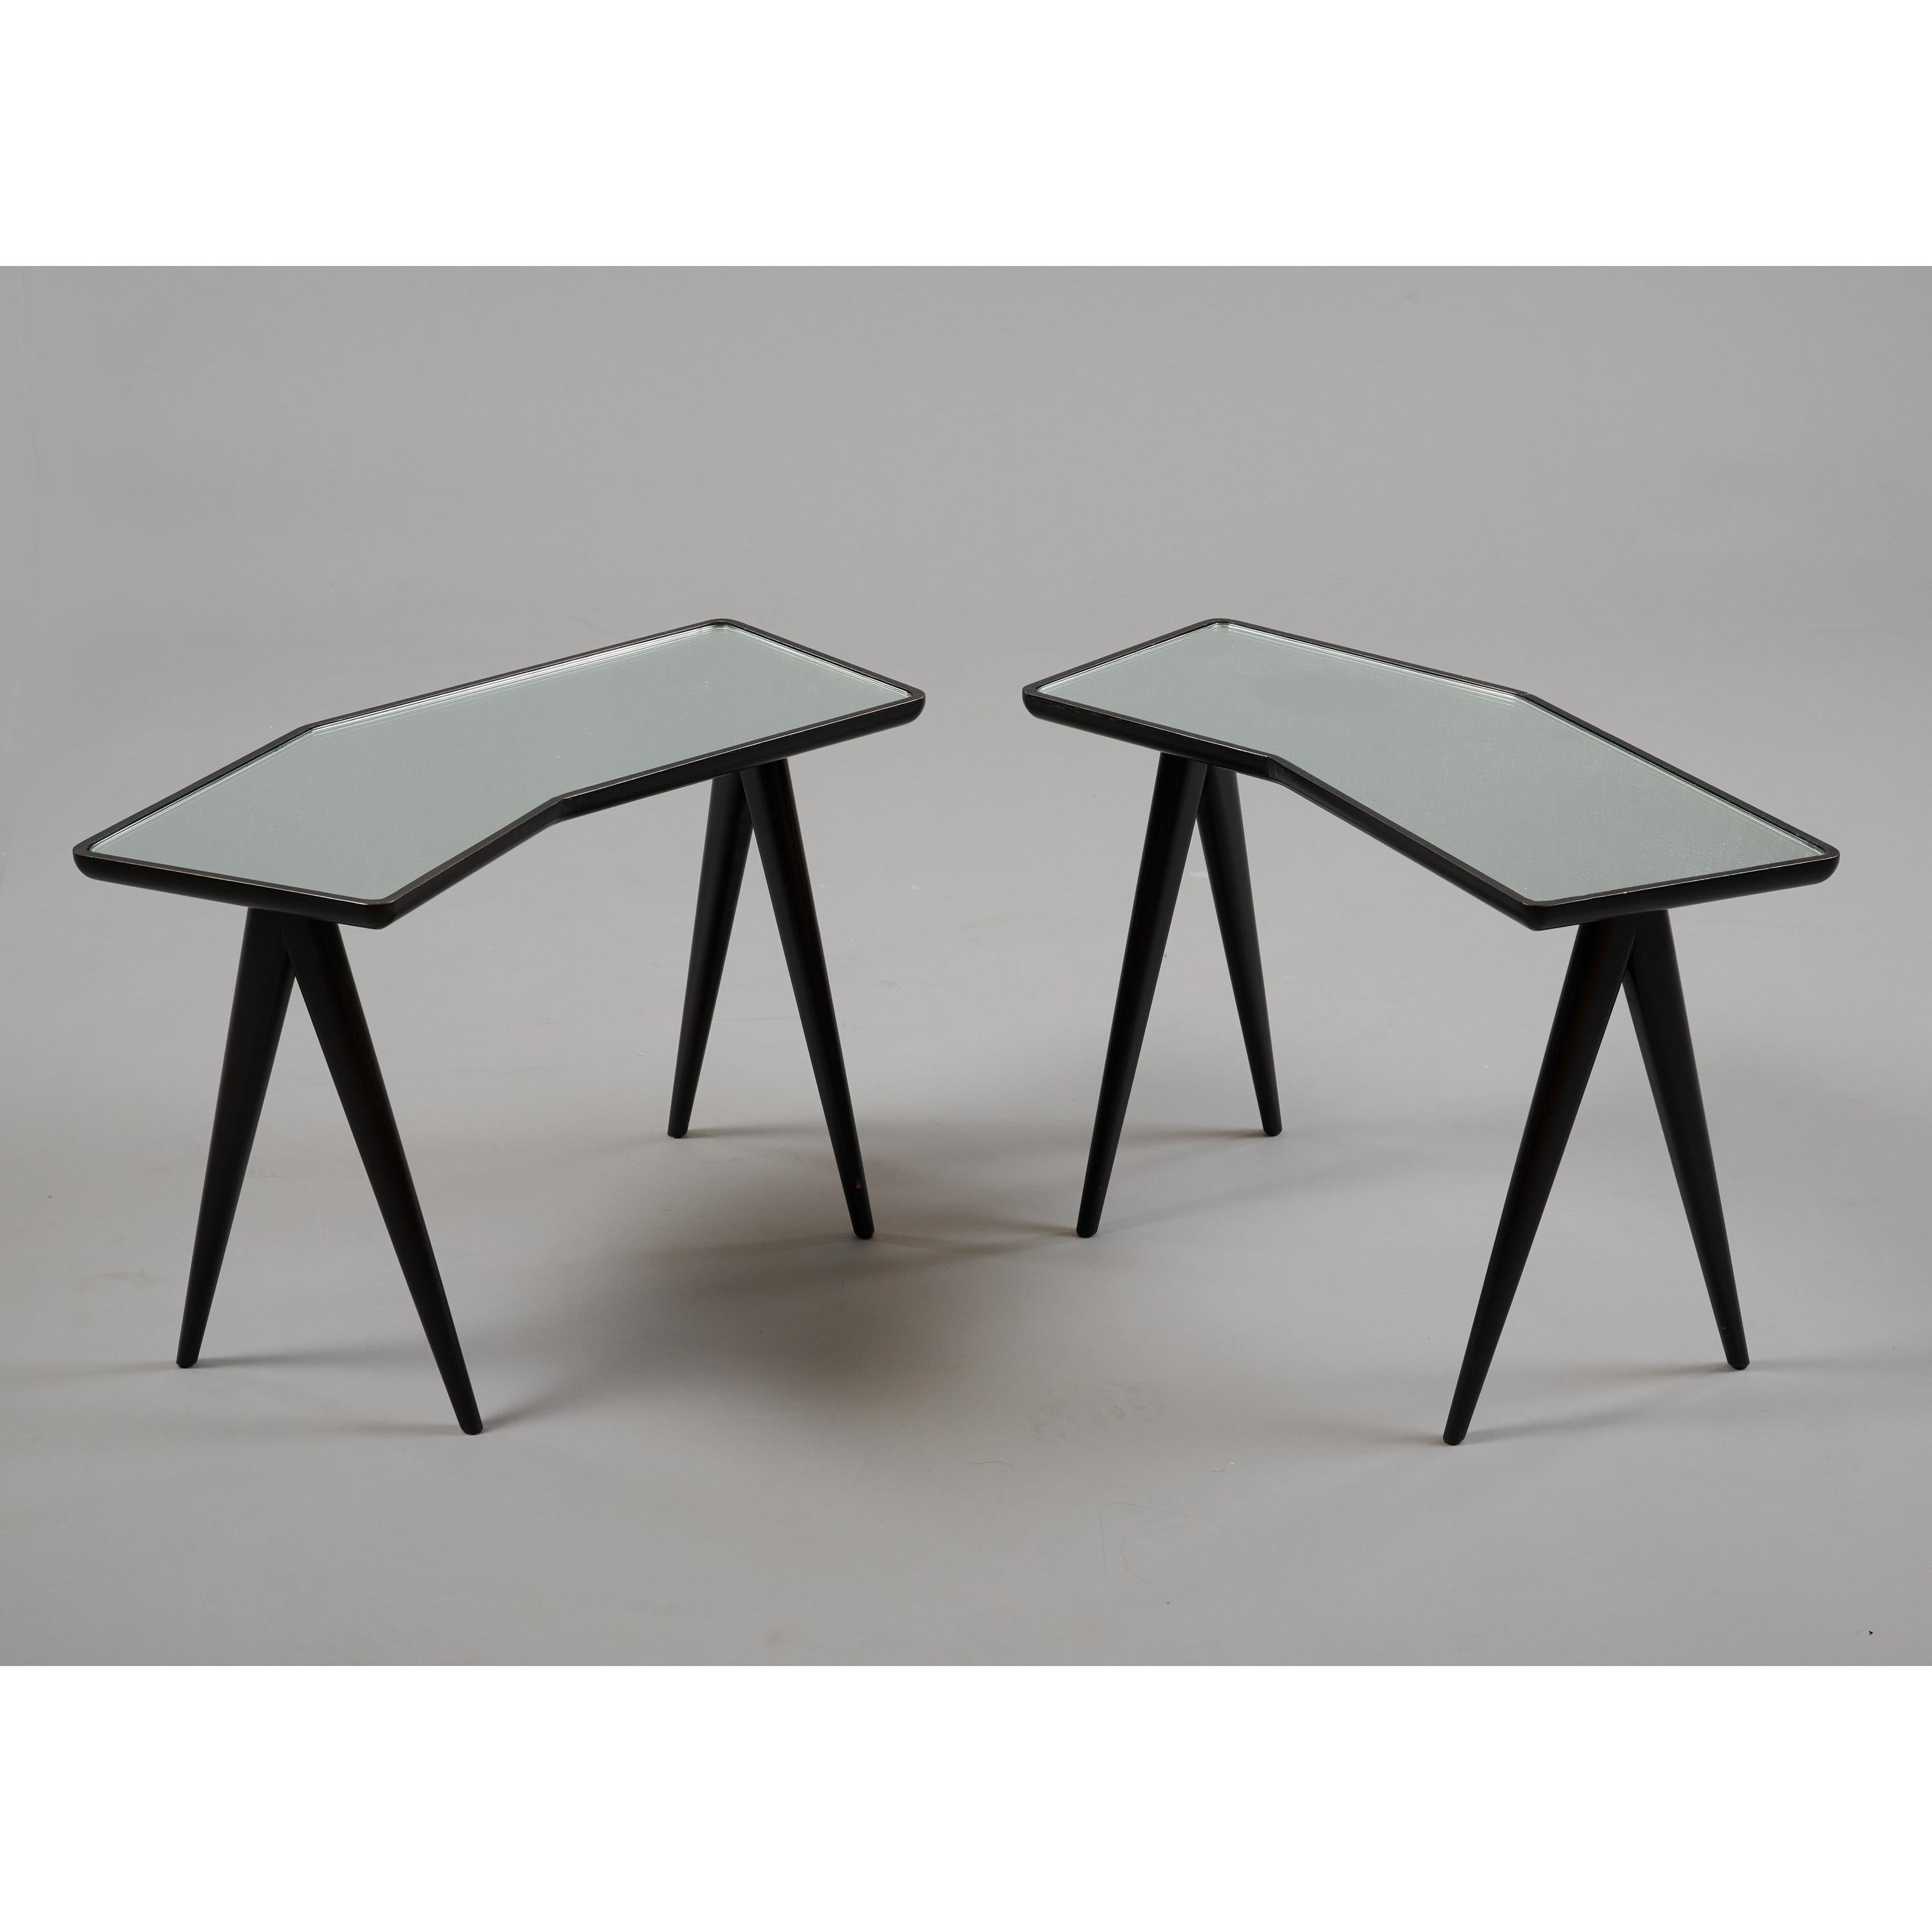 Gio Ponti (1891 - 1979) and Pietro Chiesa (1892 - 1948) 

A handsome pair of asymmetrical side tables by Gio Ponti and Pietro Chiesa for Fontana Arte. A geometric frame in ebonized walnut cradles an irregular hexagonal mirrored top, raised on a